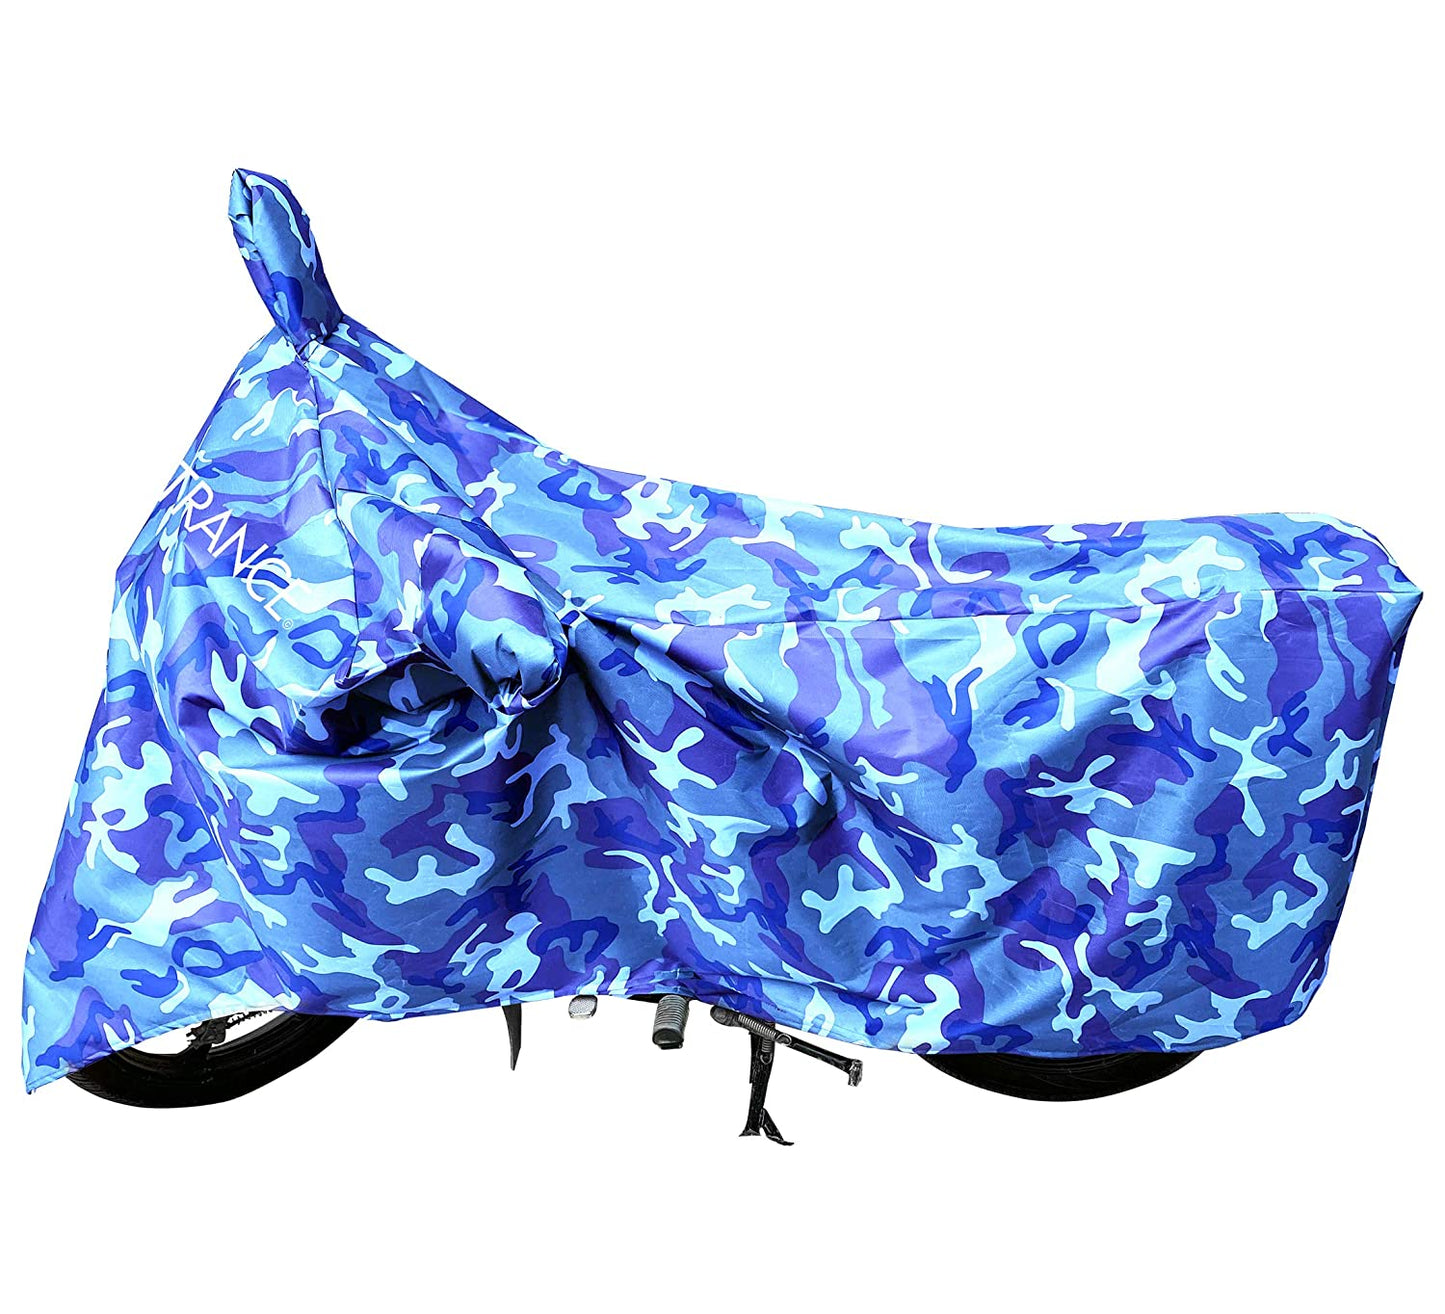 MotoTrance Jungle Bike Body Covers For TVSÂ  Radeon 2018 - Interlock-Stitched Waterproof and Heat Resistant with Mirror Pockets